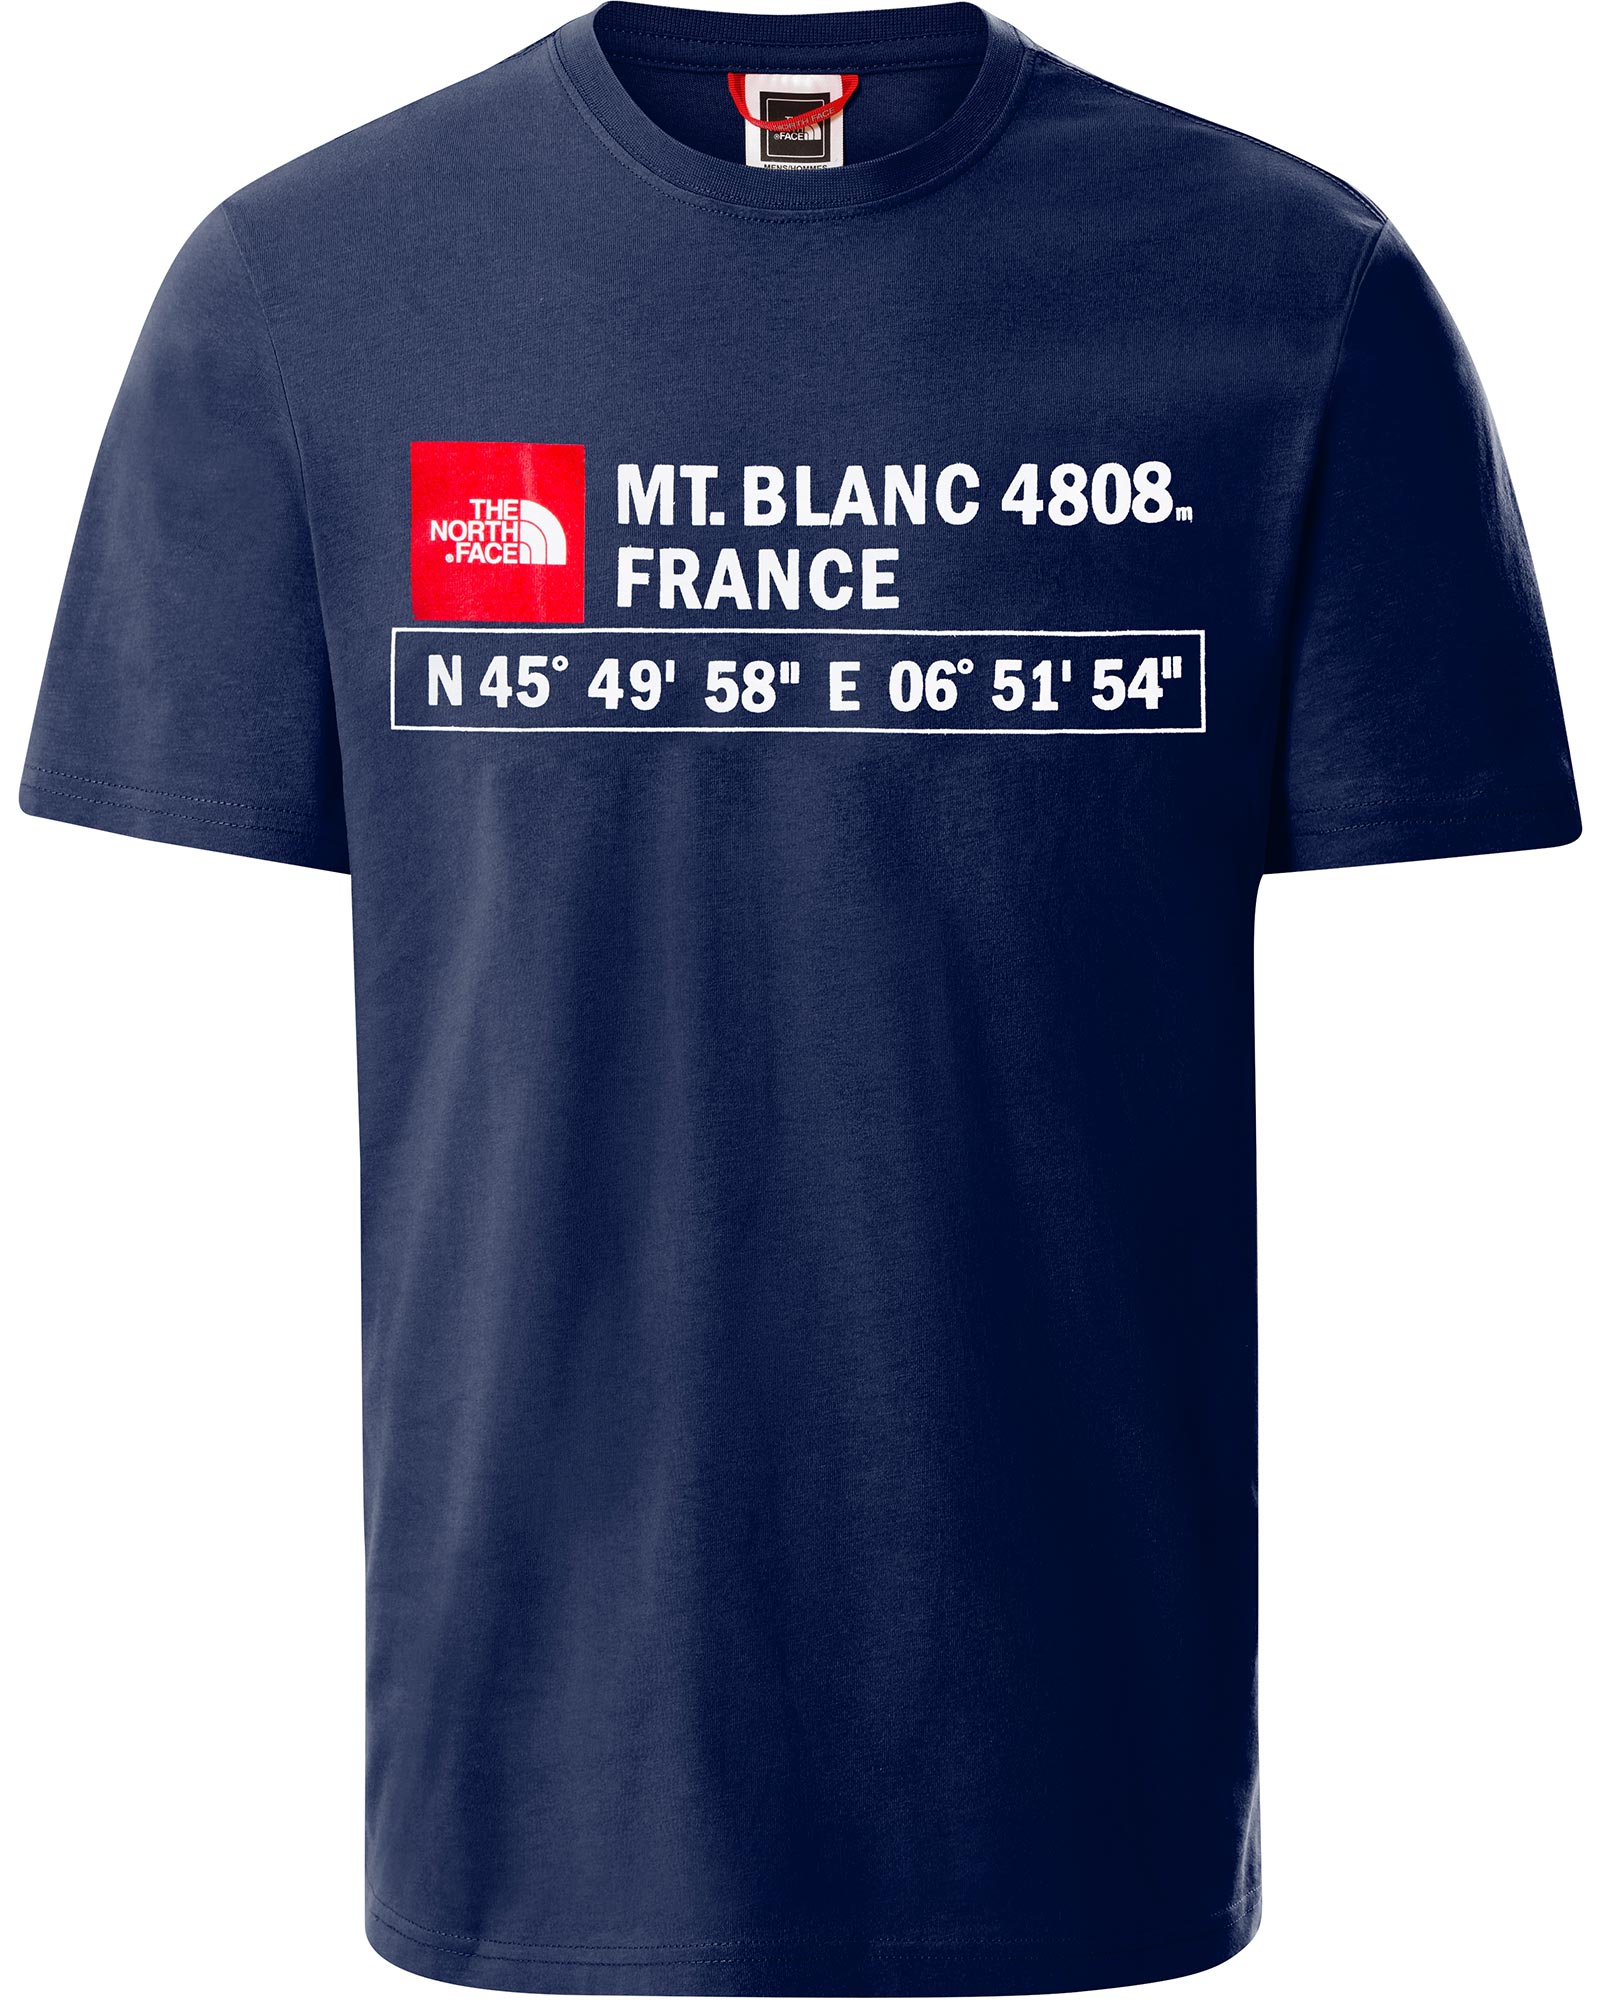 Product image of The North Face Mt Blanc GPS Men's T-Shirt